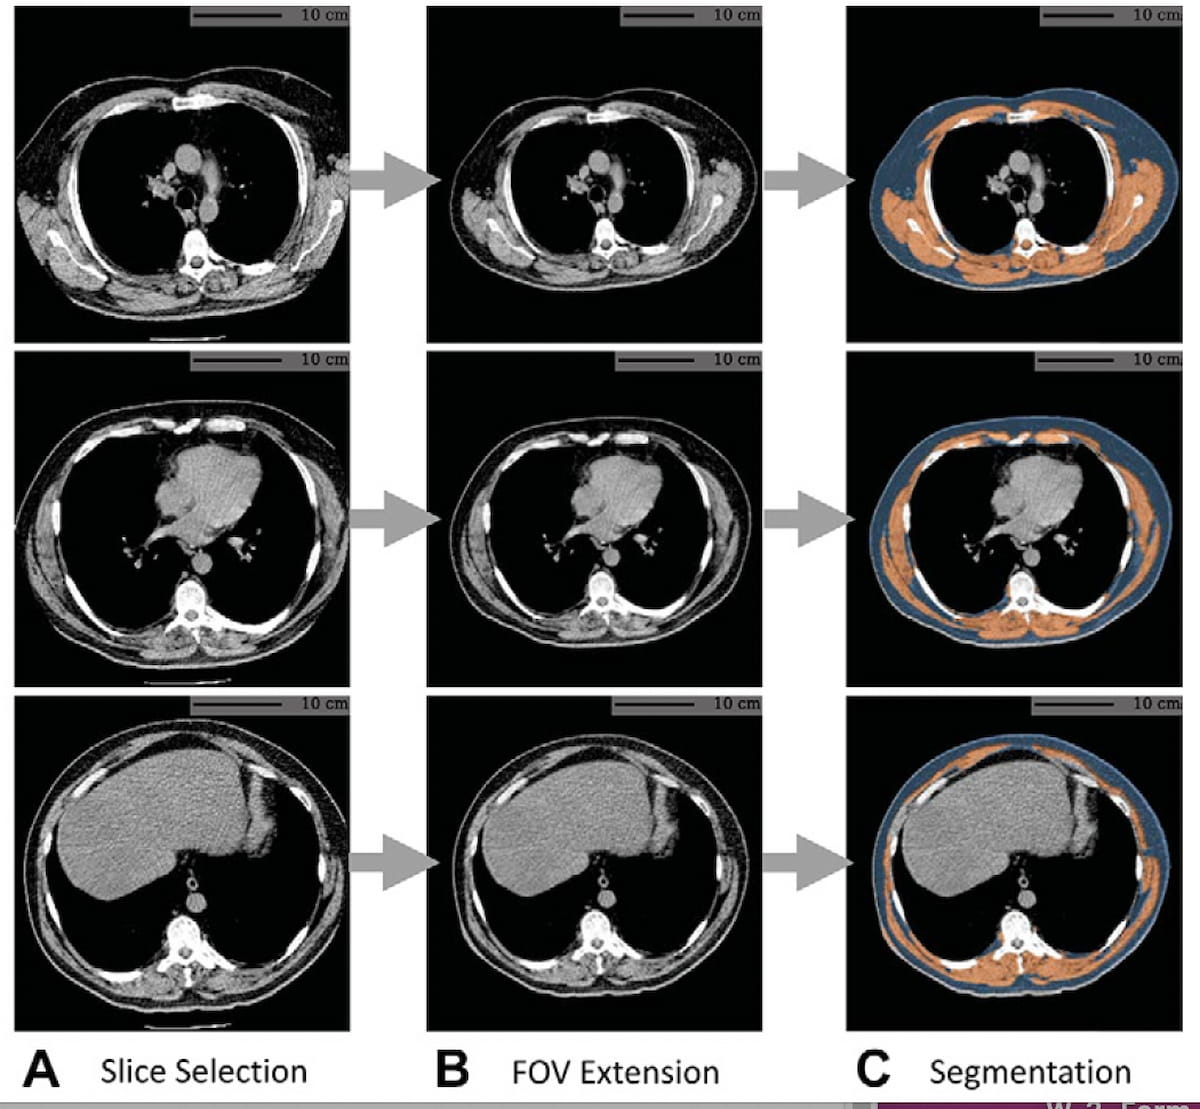 Study: AI Assessment of Chest CT May Predict Multiple Mortality Risks